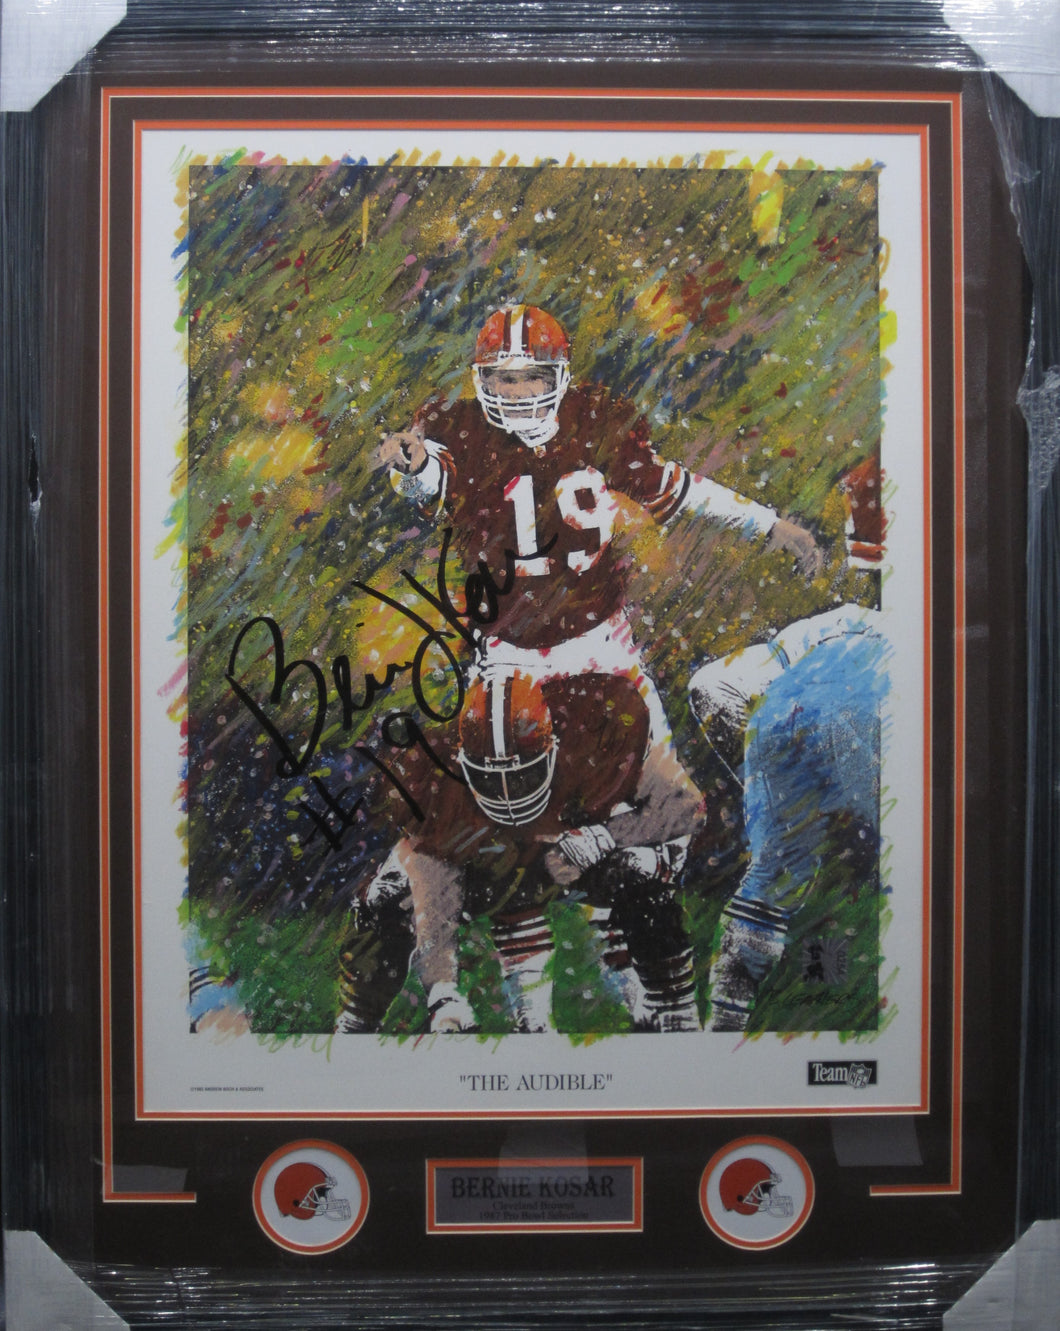 Bernie Kosar SIGNED Framed LARGE Lithograph Print ( JERSEY SIZE FRAME) WITH COA